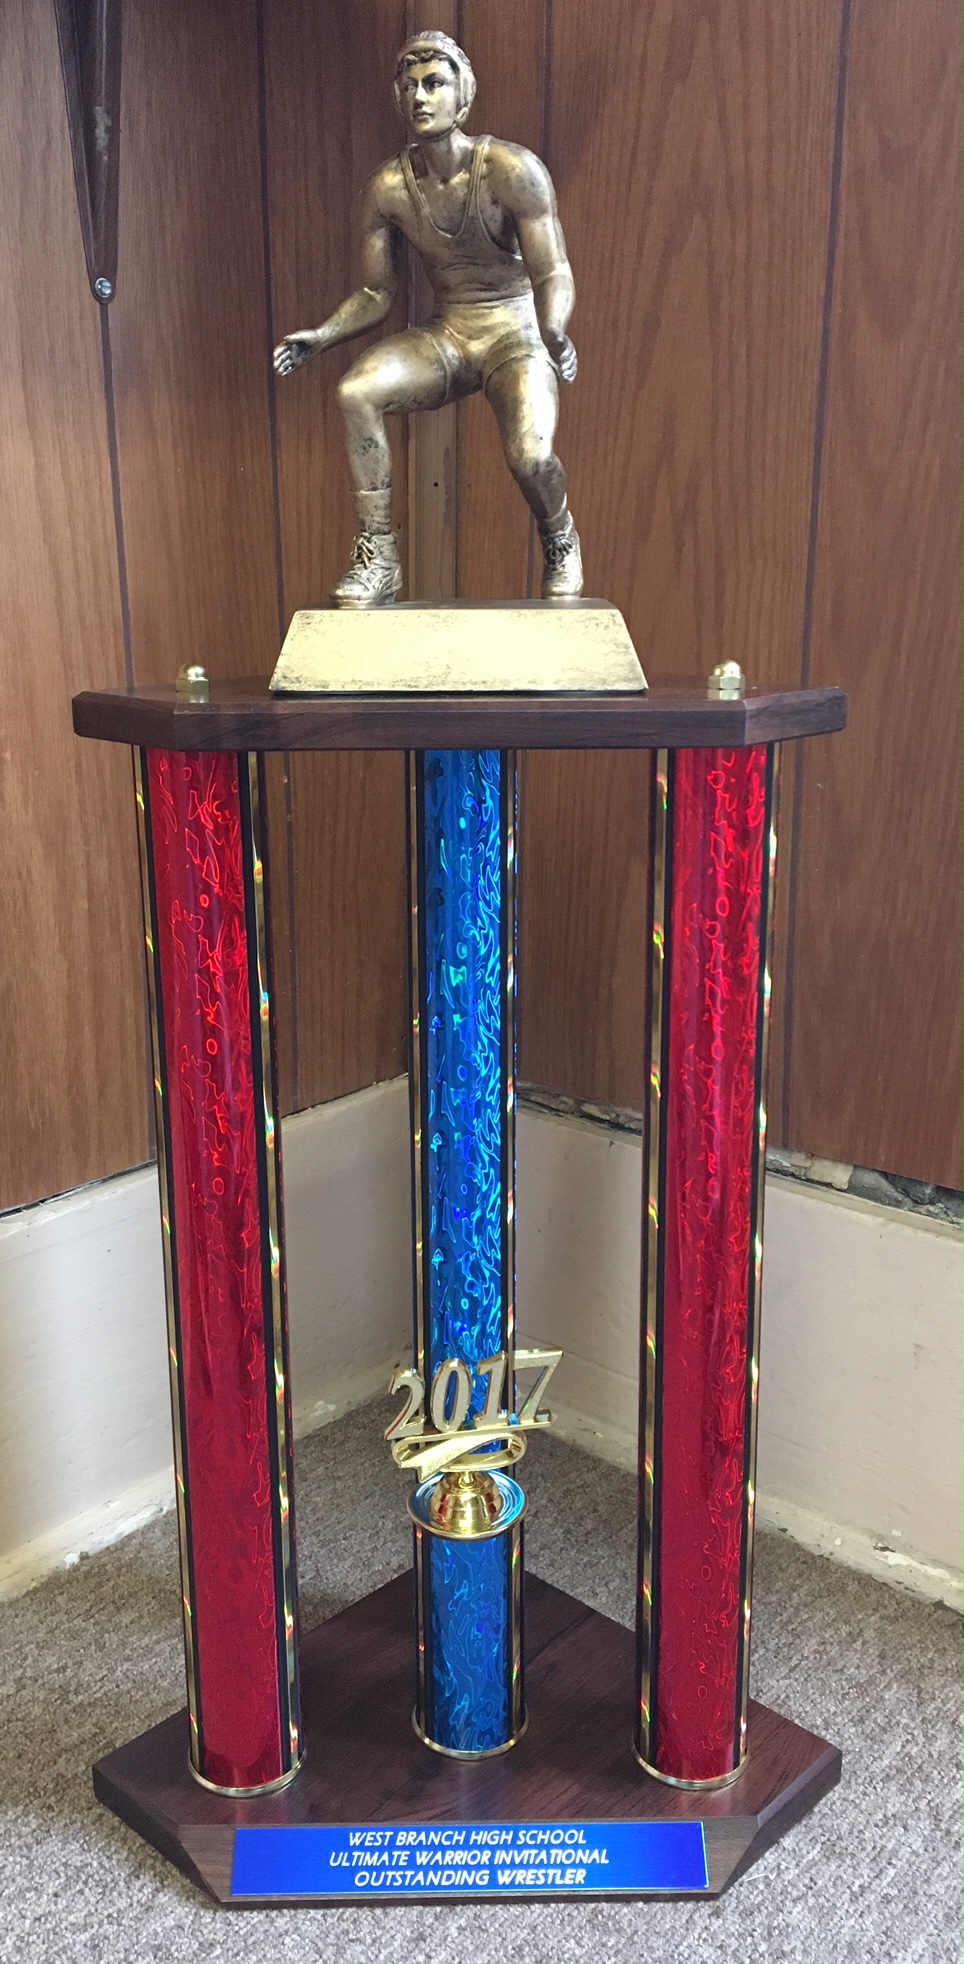 The top wrestlers will be vying for this OW trophy